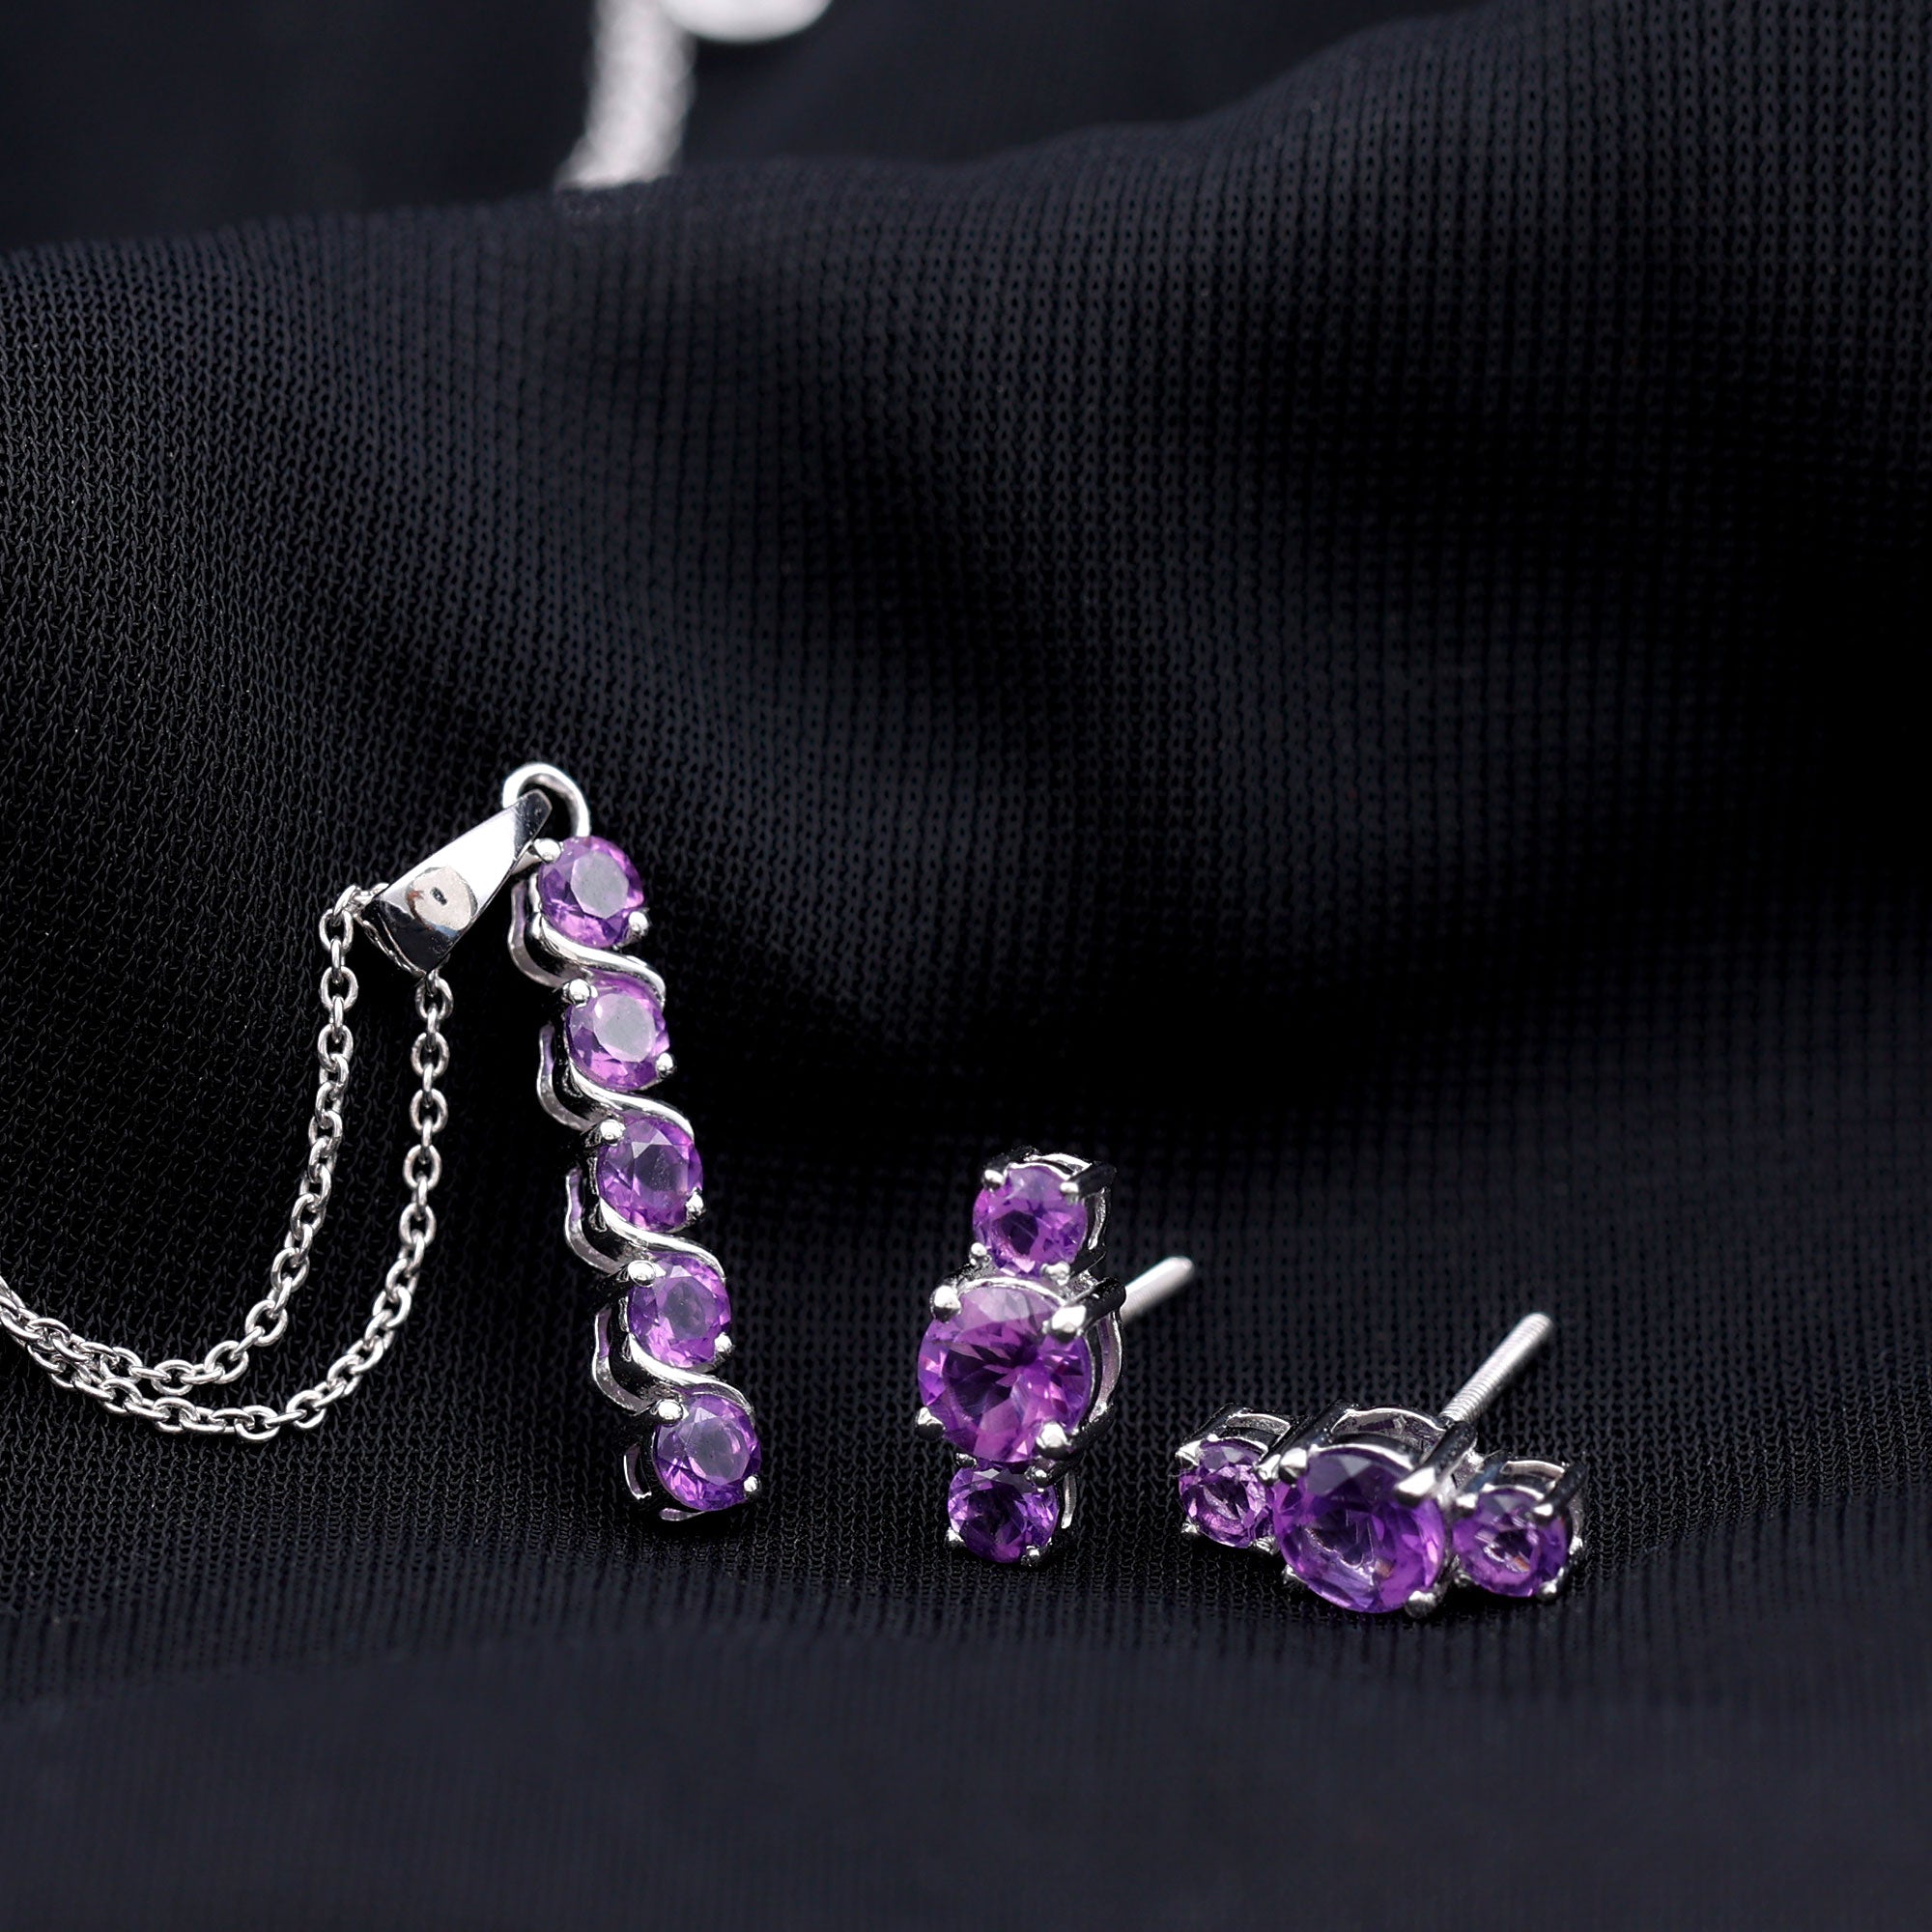 1.75 CT Amethyst Silver Bar Necklace and Earring Set - Rosec Jewels